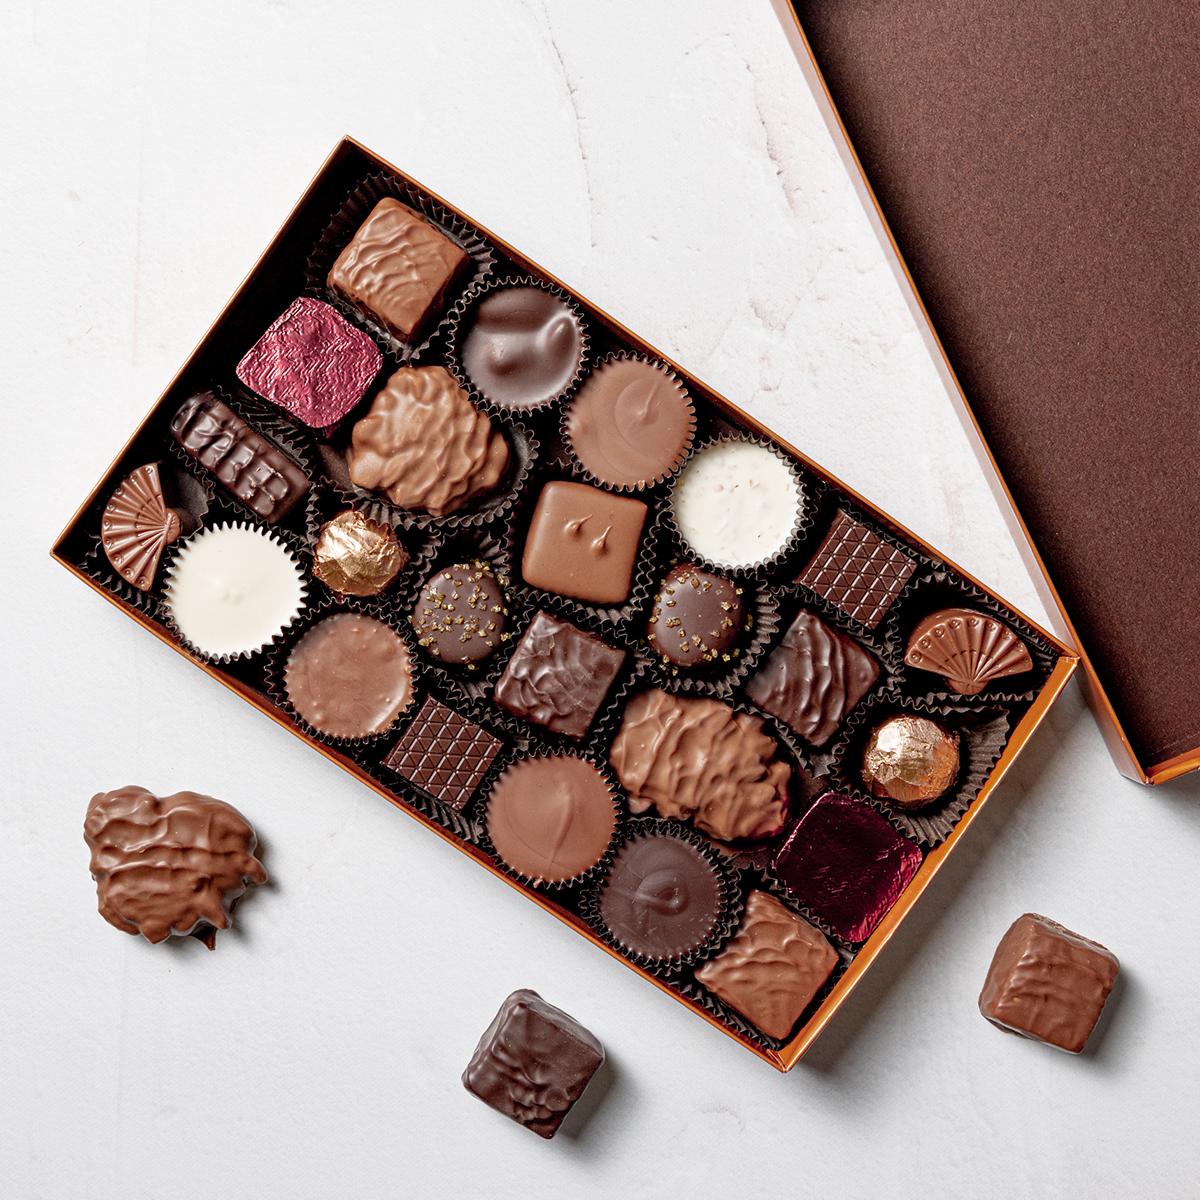 Assorted Chocolate Gift Box 14.5 oz. - rmcfshop